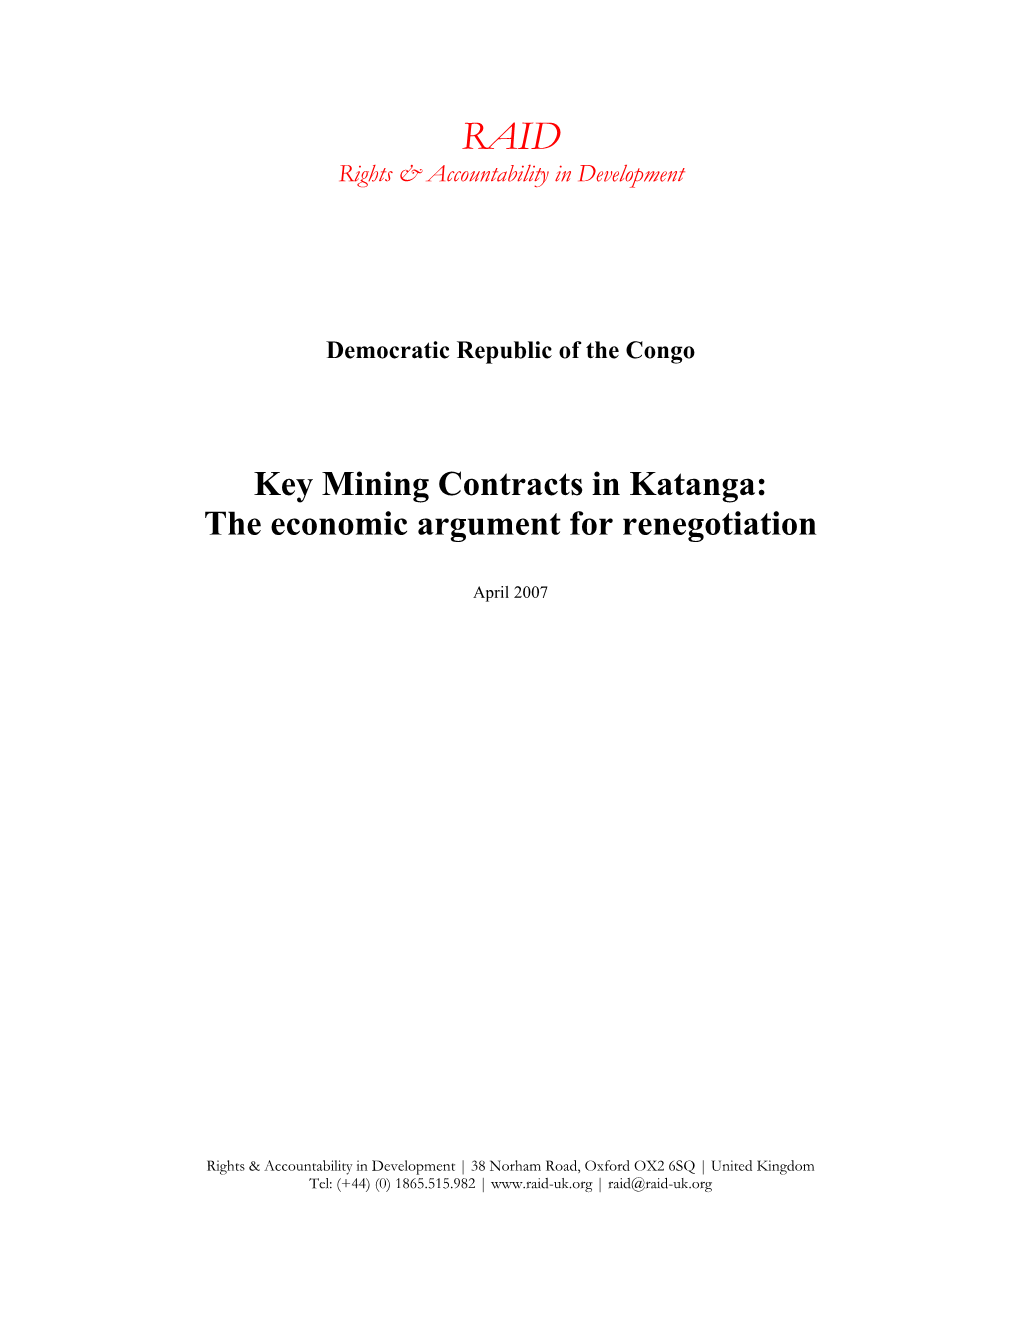 Key Mining Contracts in Katanga: the Economic Argument for Renegotiation